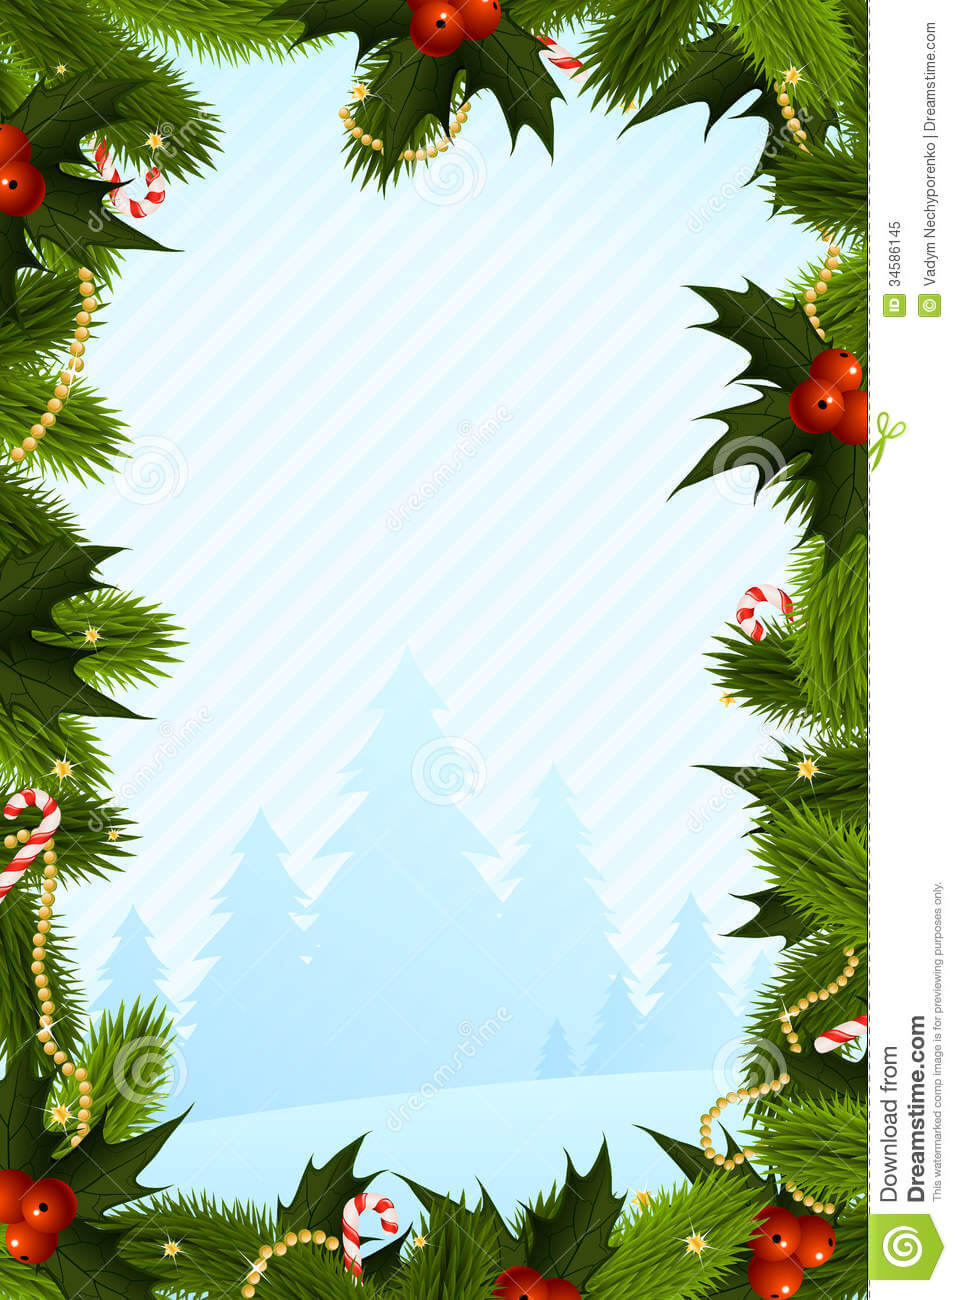 043 Christmas Card Template Fir Trees Decorations Word Menu With Regard To Blank Christmas Card Templates Free